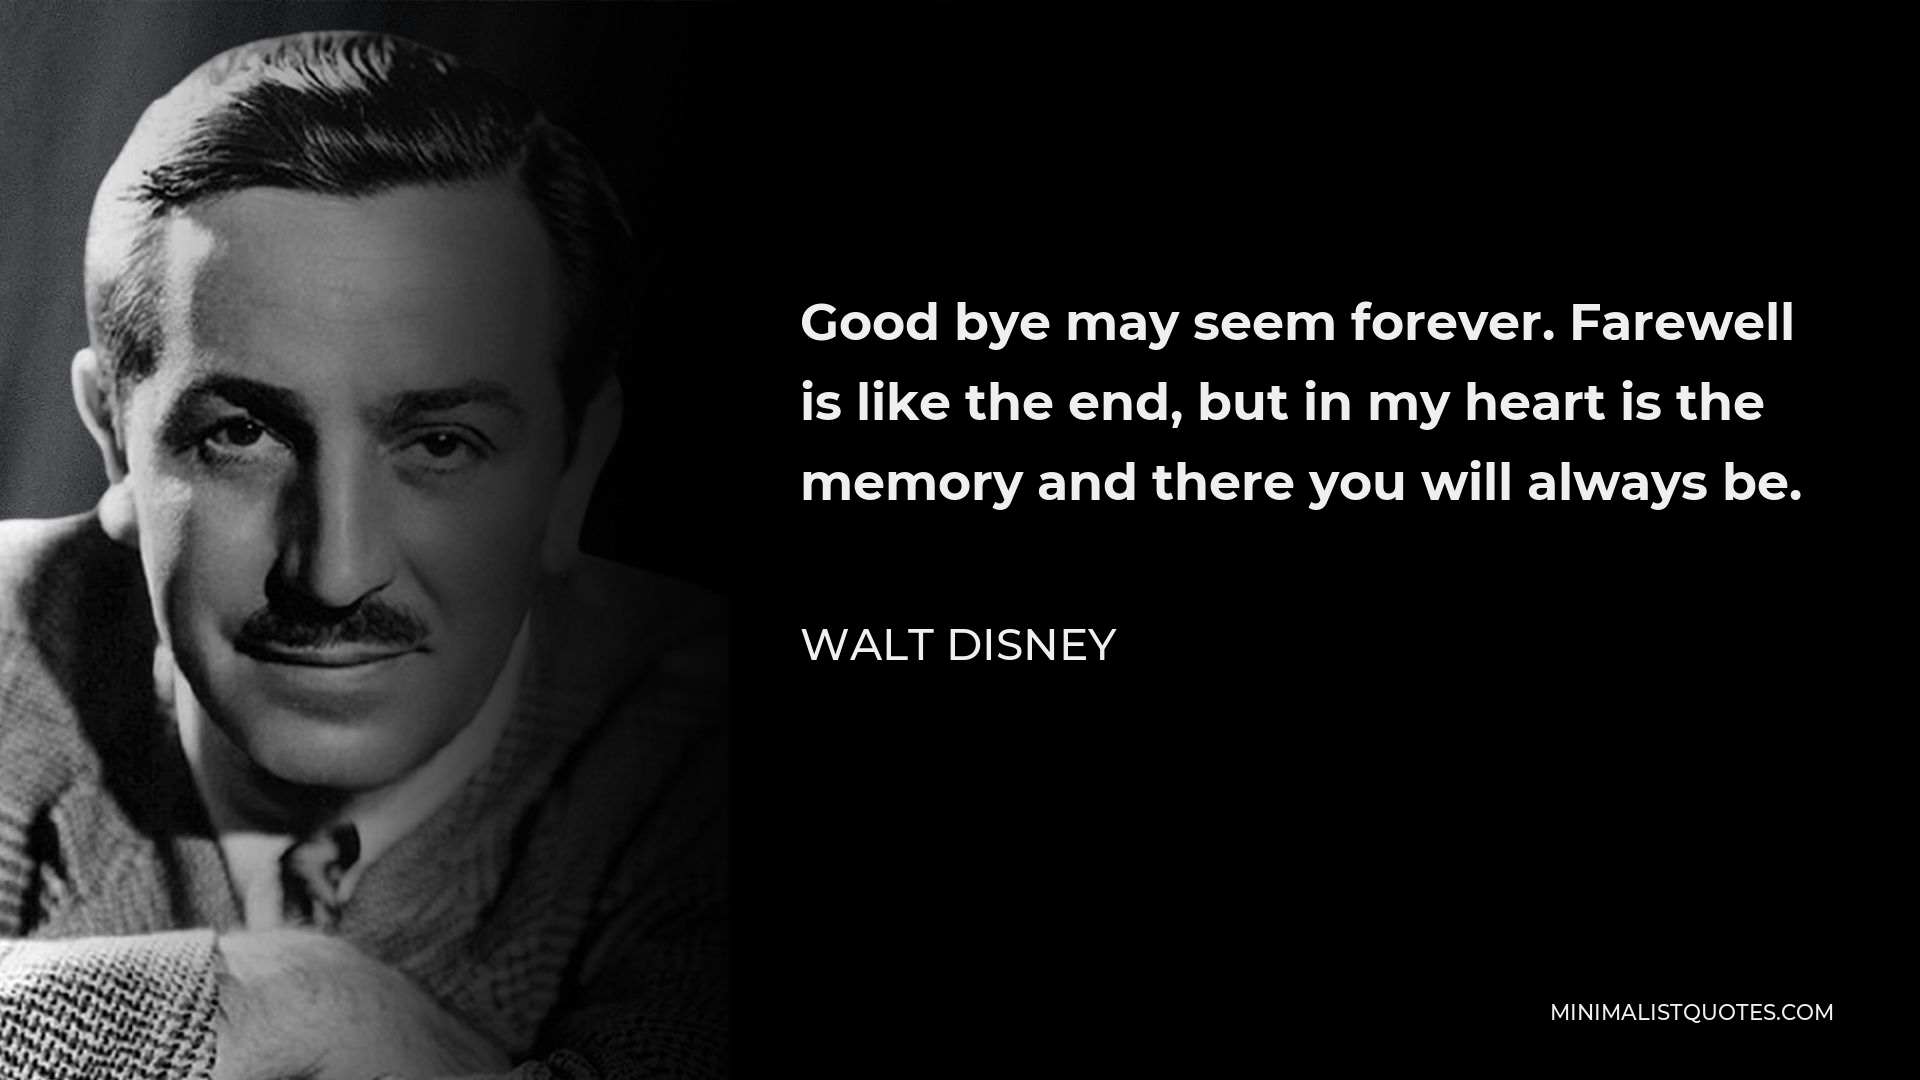 Walt Disney Quote - Good bye may seem forever. Farewell is like the end, but in my heart is the memory and there you will always be.